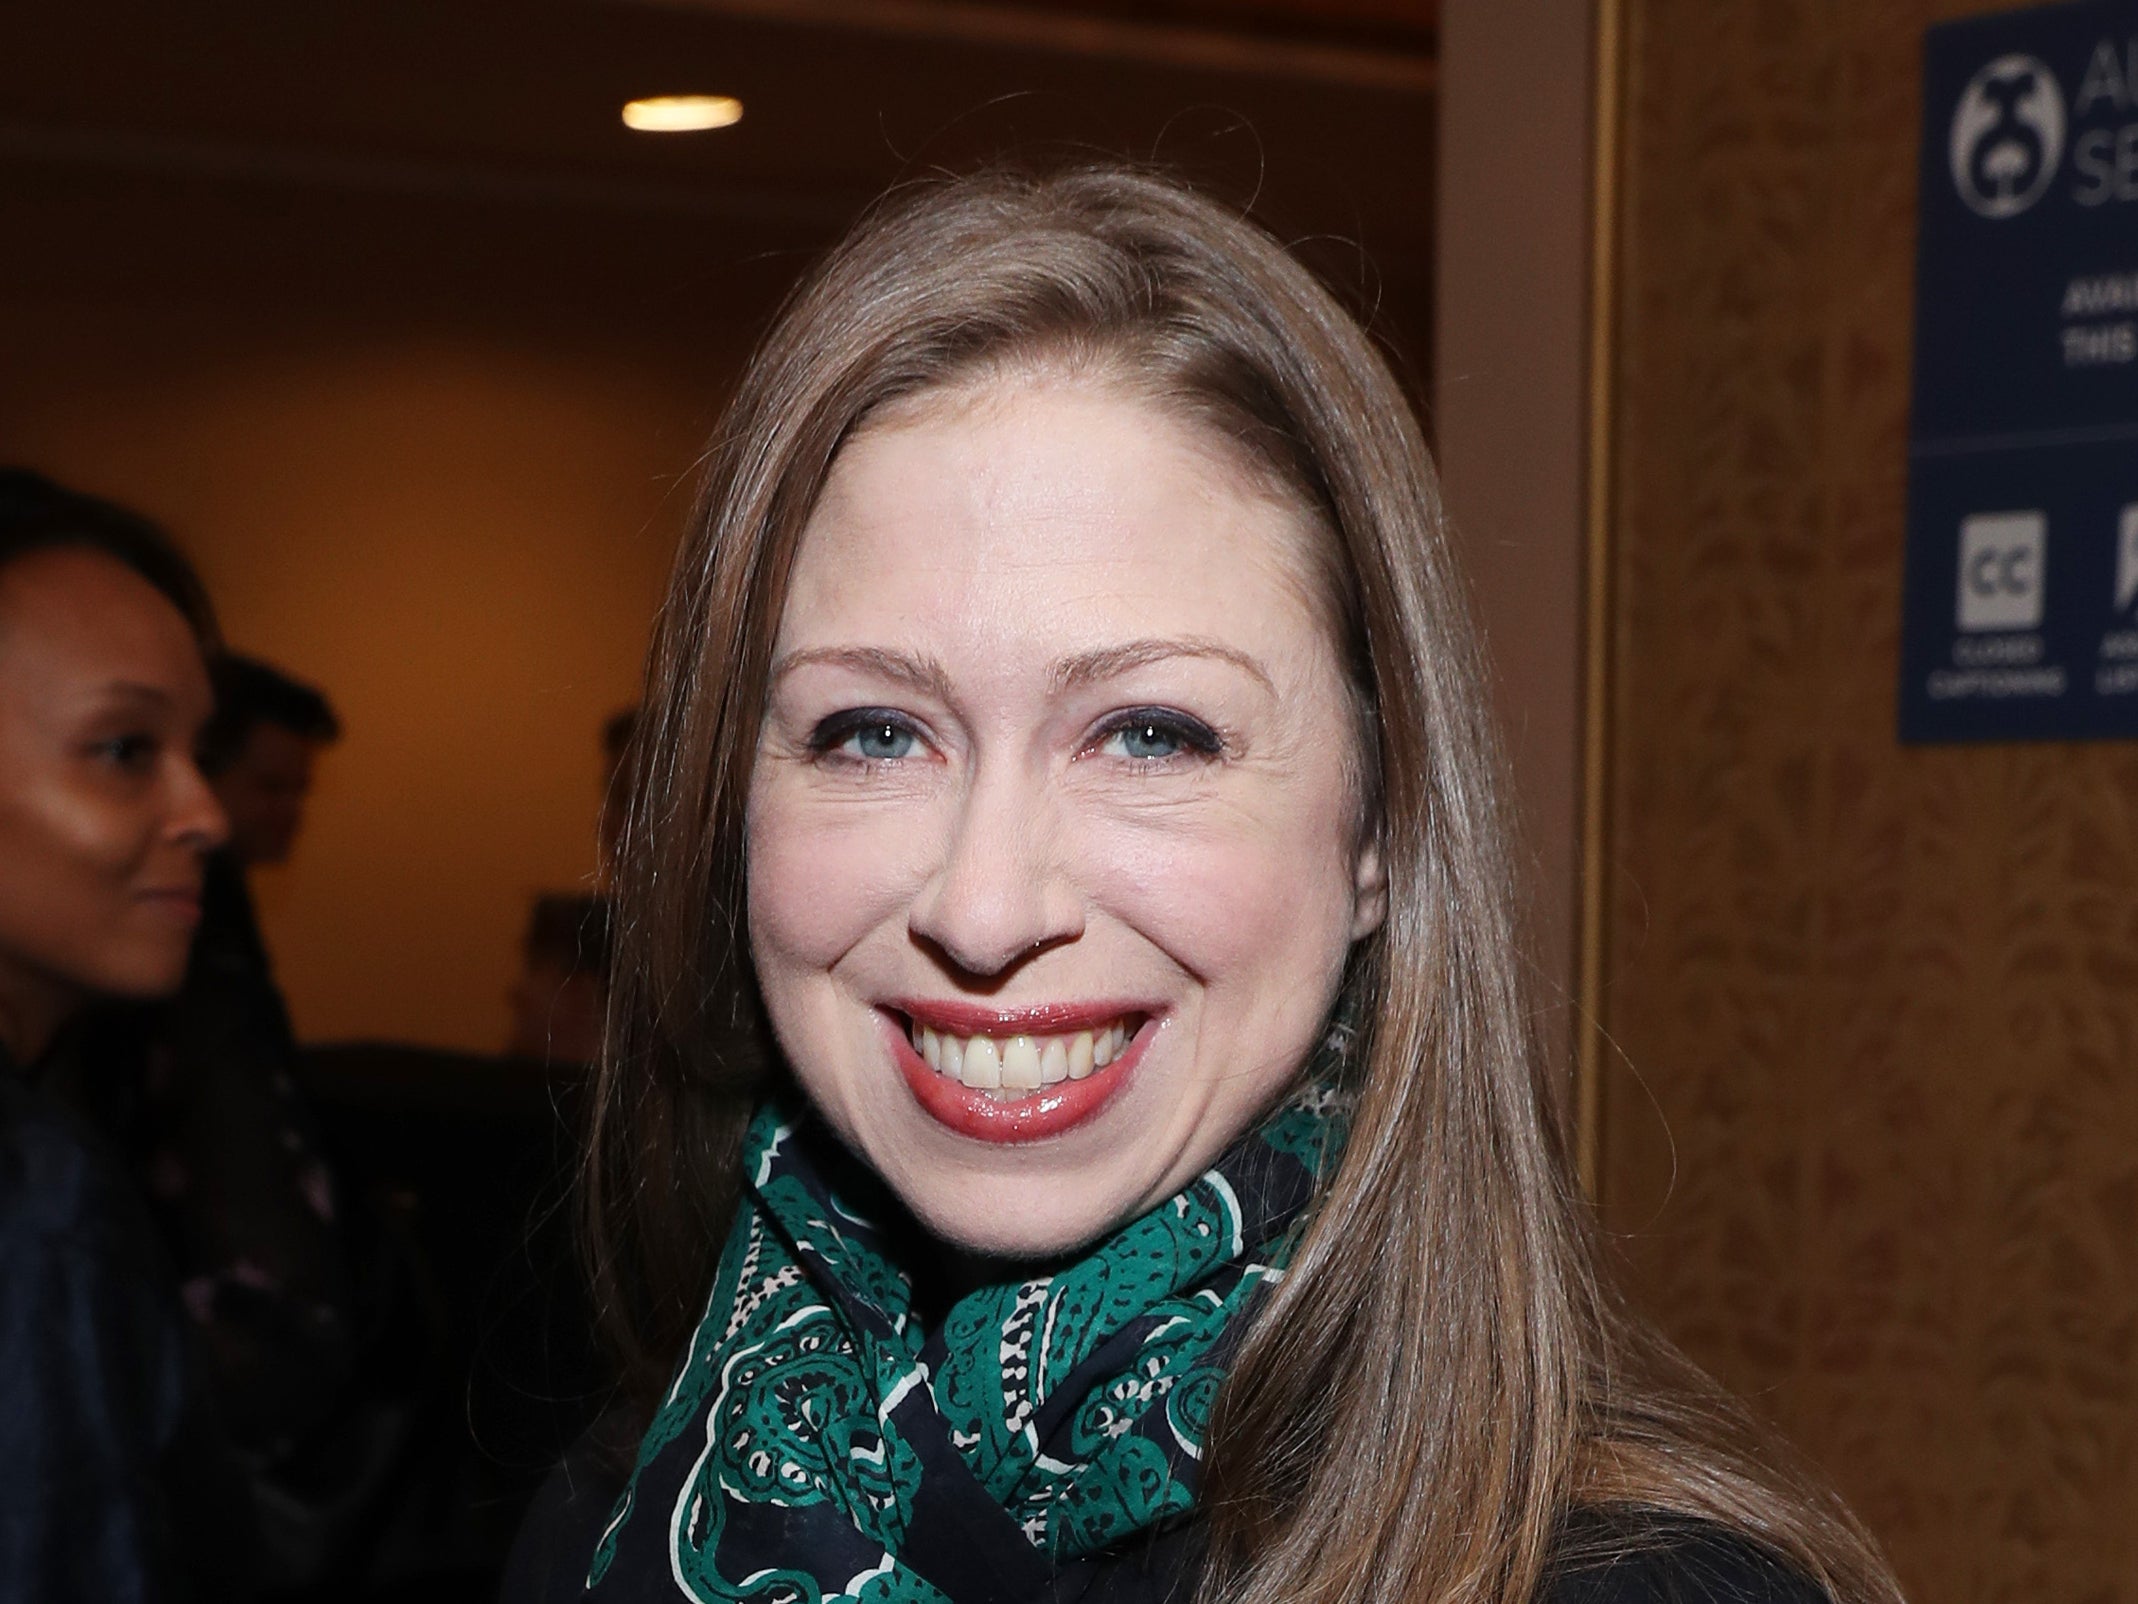 Chelsea Clinton was ‘made fun of’ by Julia Sweeney on ‘SNL’ in early 1990s